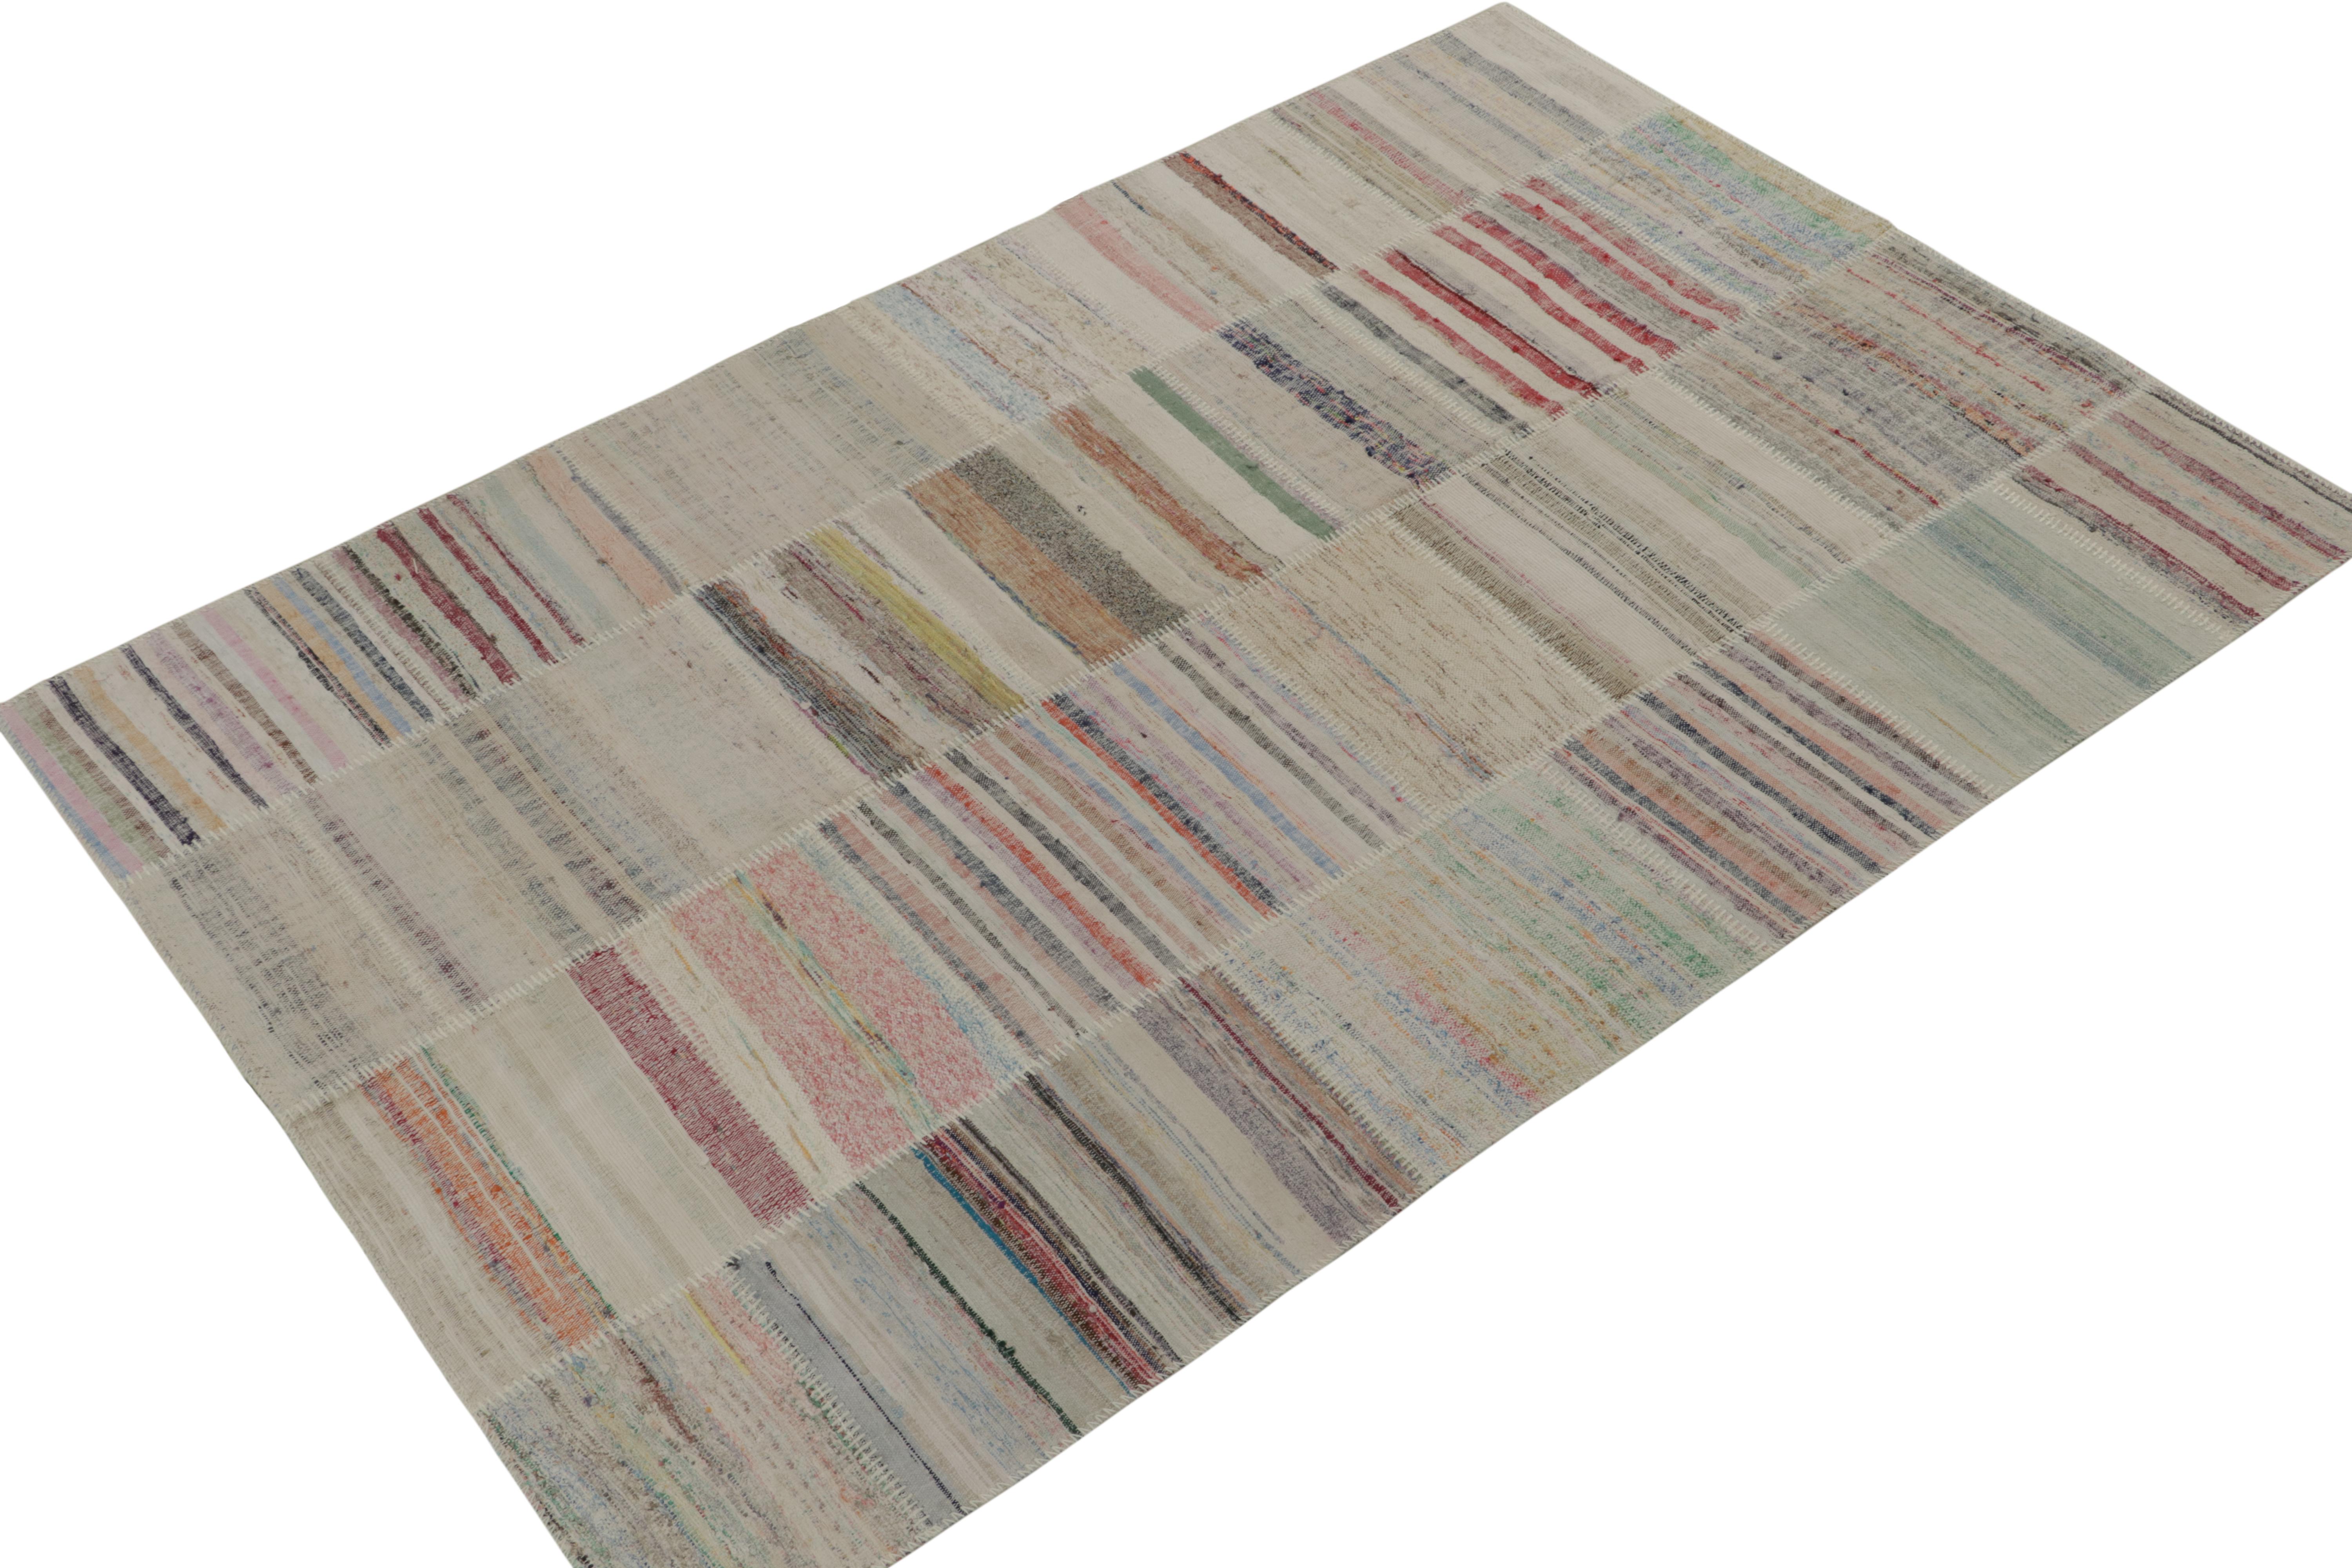 Handwoven in wool, Rug & Kilim presents a 6x9 contemporary rug from their innovative new patchwork kilim collection. 

On the Design: 

This flat weave technique repurposes vintage yarns in polychromatic stripes and striae, achieving a playful